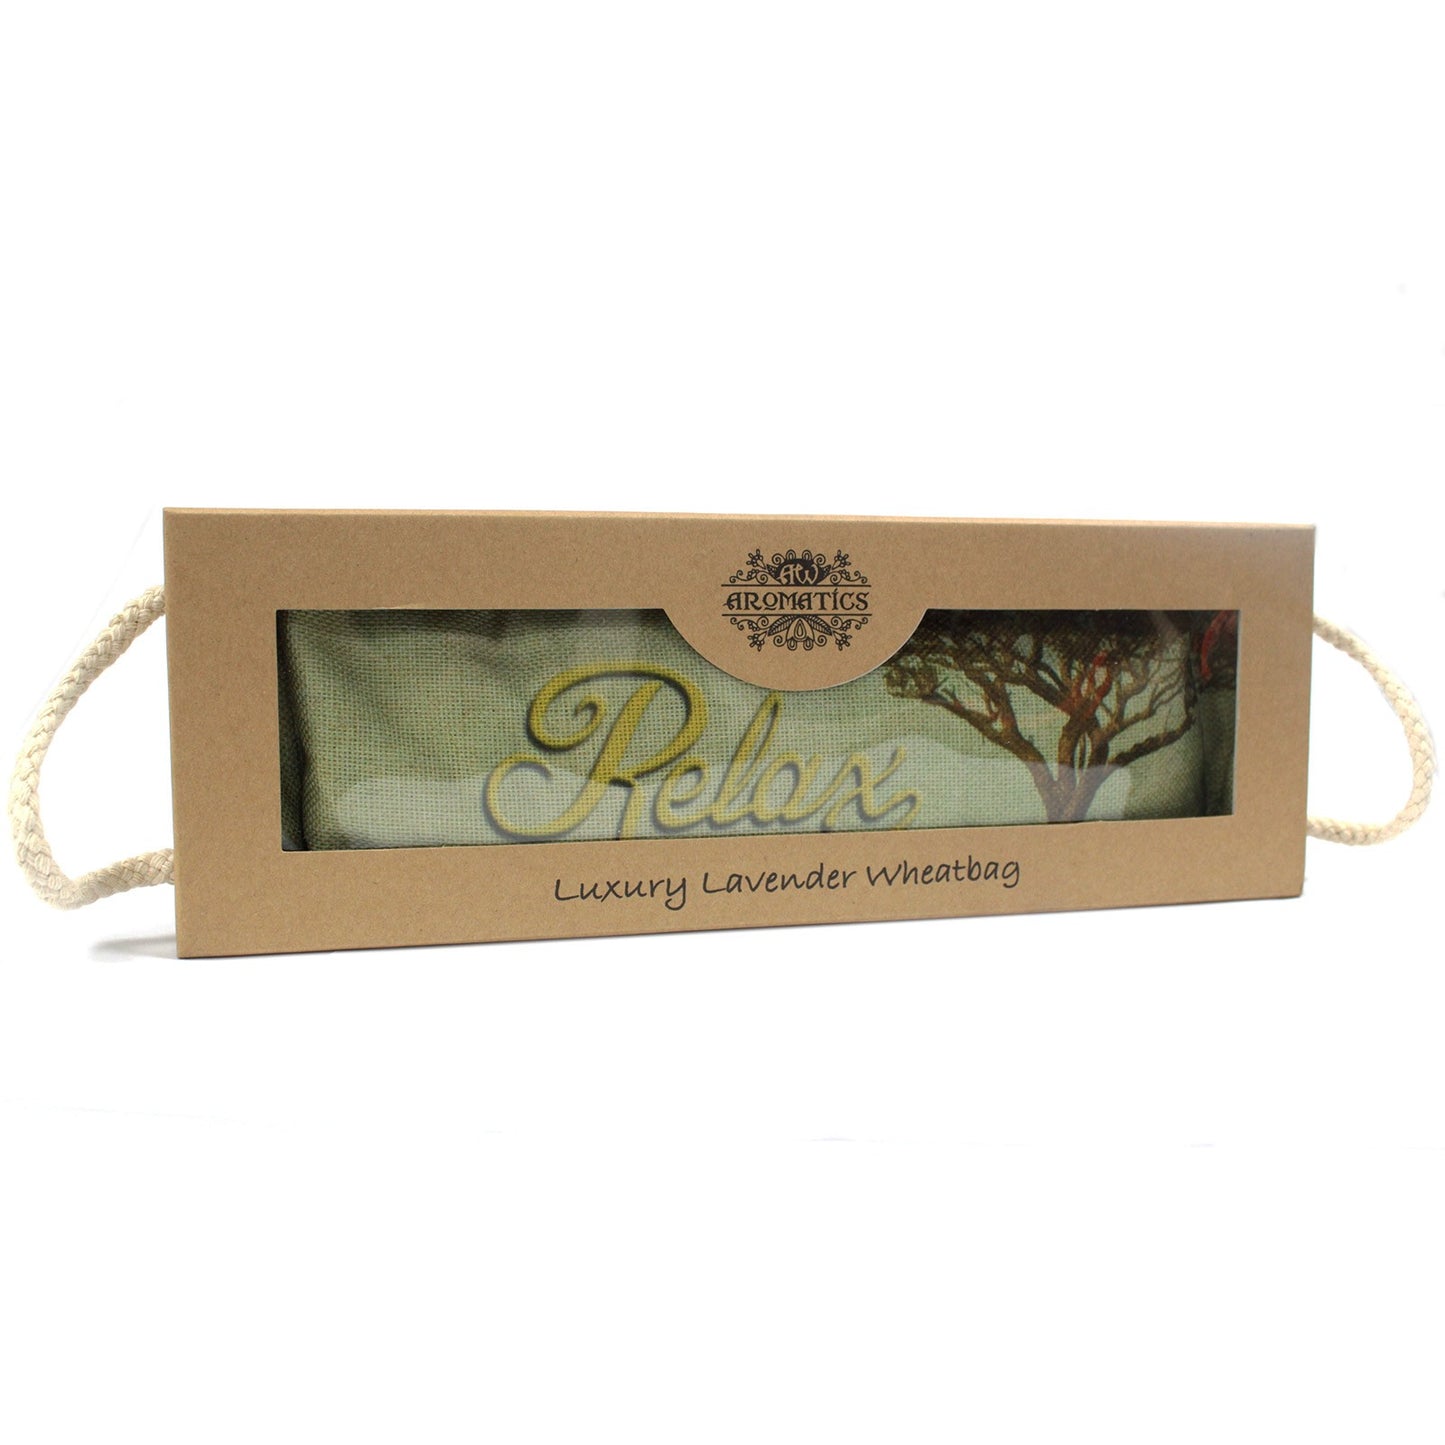 Luxury Lavender Wheat Bag in Gift Box - Cornfield RELAX